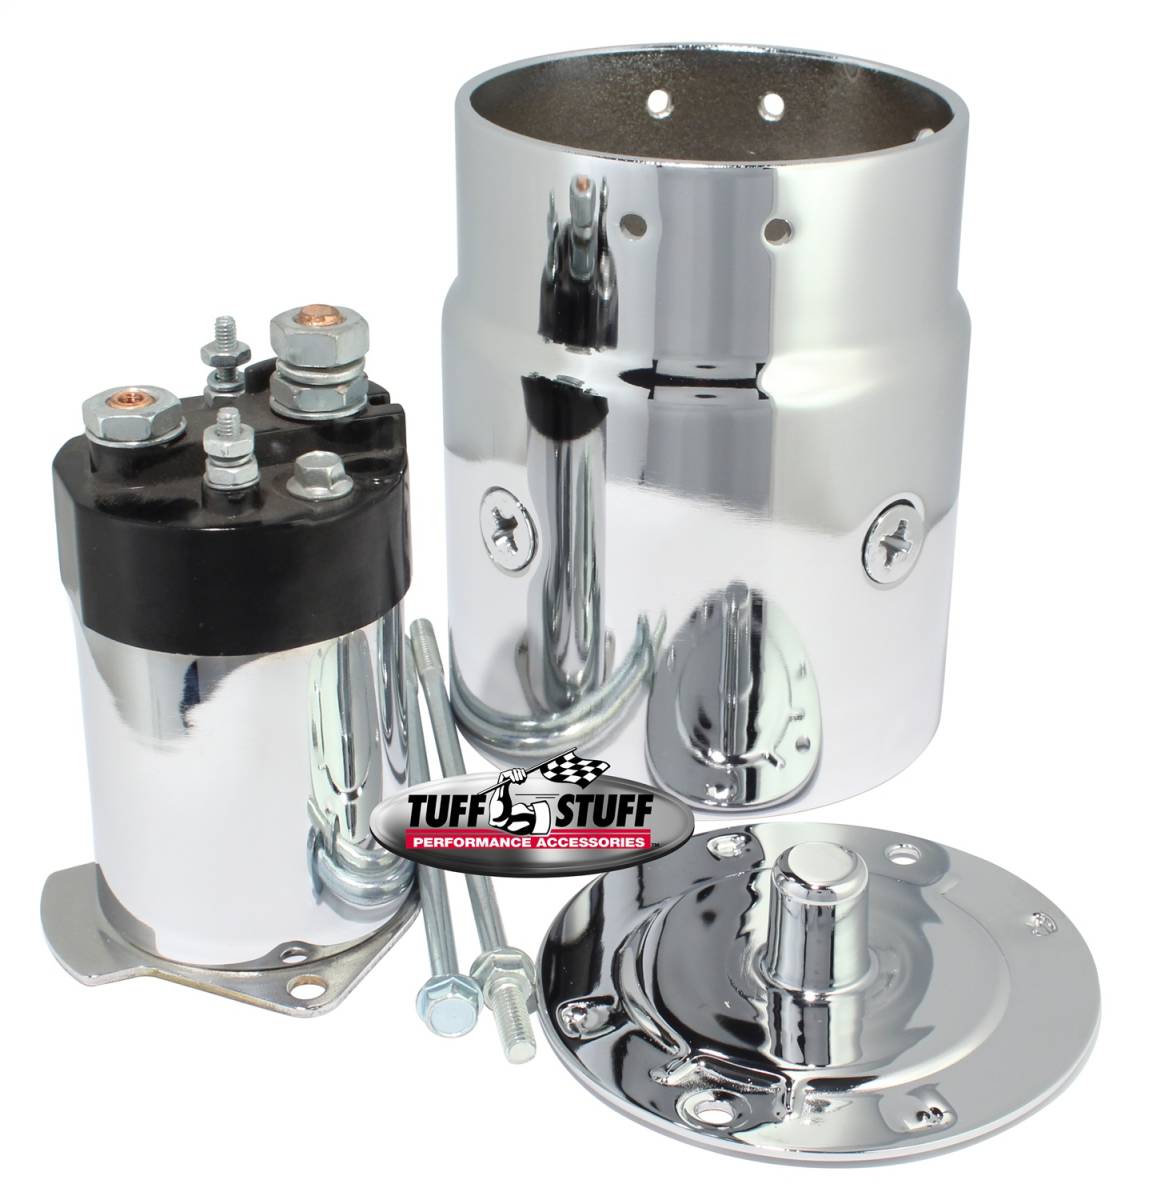 Tuff Stuff Performance - Chrome Plated Starter Kit For Chevy/Buick/Cadillac/Olds/Pontiac/OEM And Tuff Stuff Starter PN[3510/3570/3631/3689] 7550A